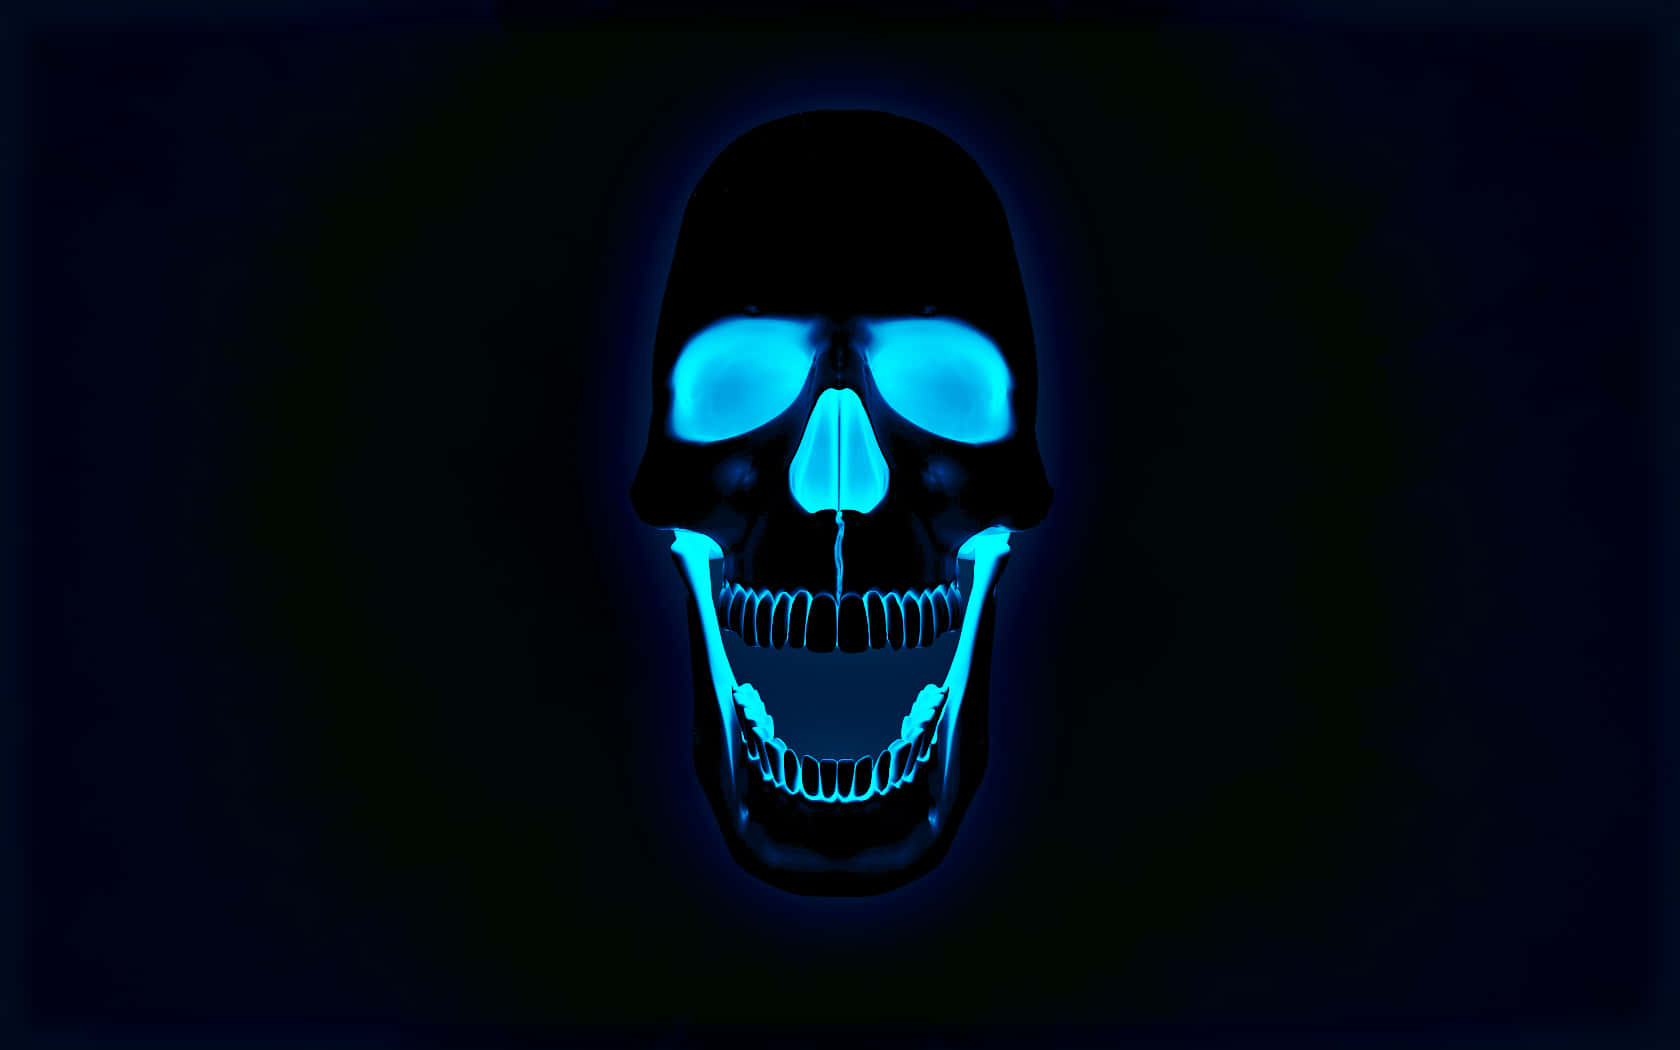 A Skeleton Skull Grinning in the Darkness